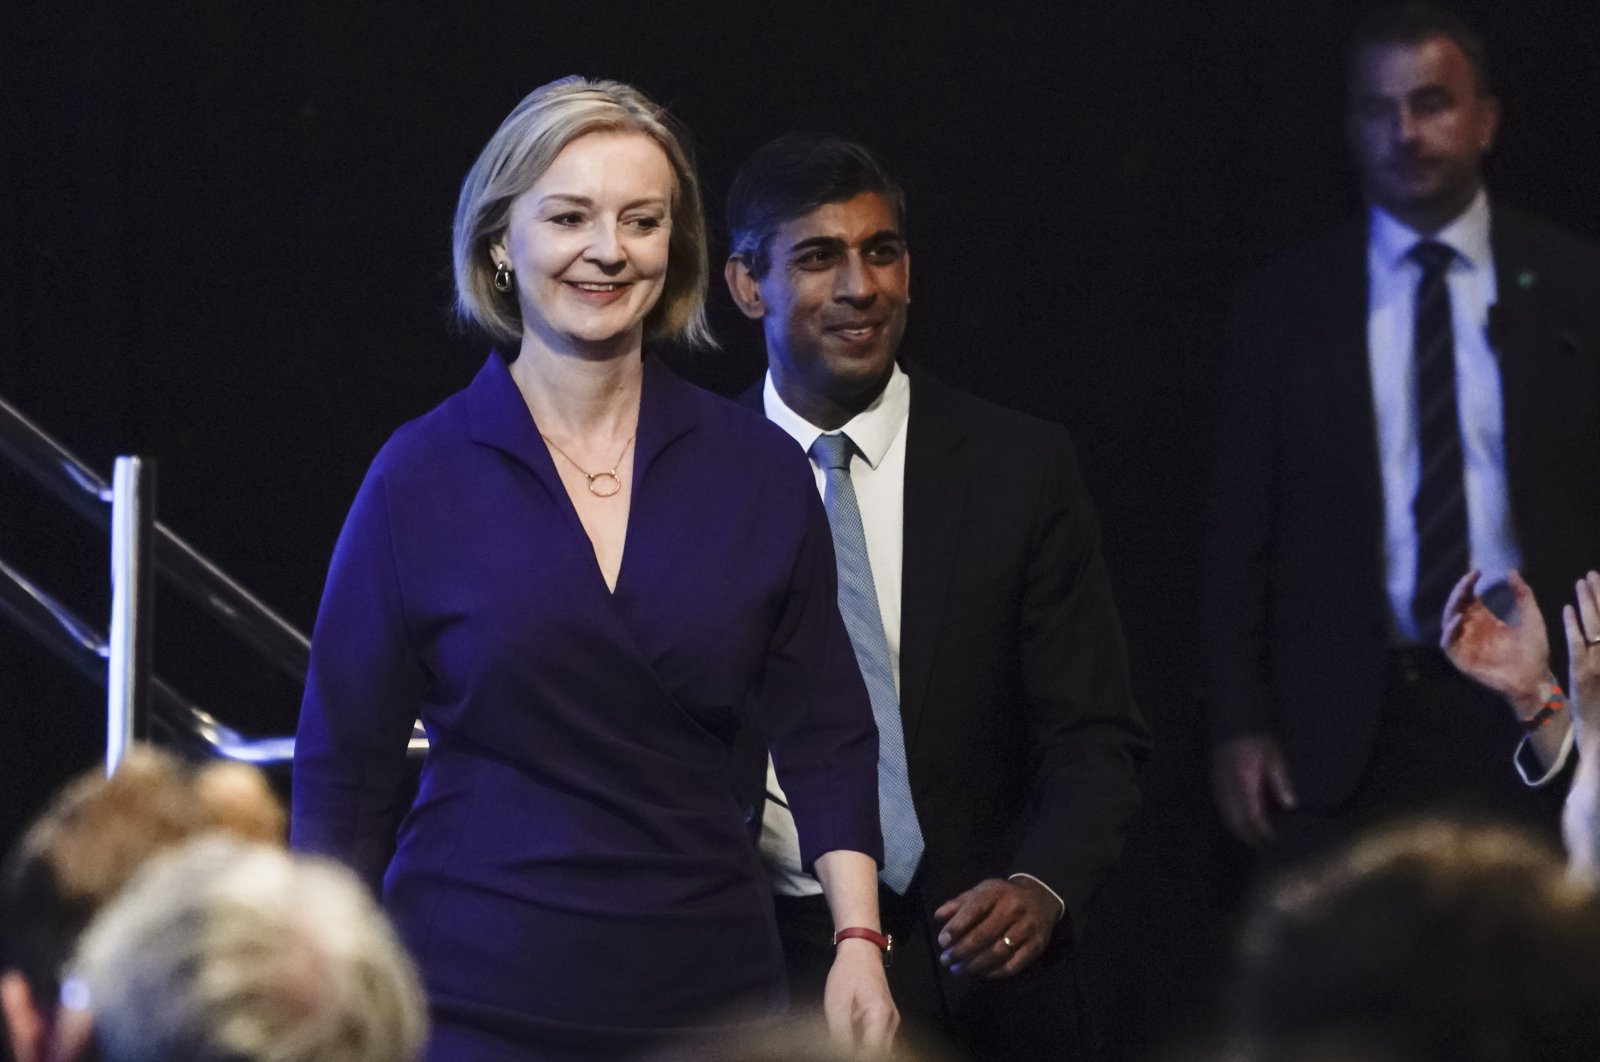 Liz Truss (L) and Rishi Sunak (C) arrive for the announcement of the result of the Conservative Party leadership contest at the Queen Elizabeth II center in London, U.K., Sept. 5, 2022. (AP Photo)